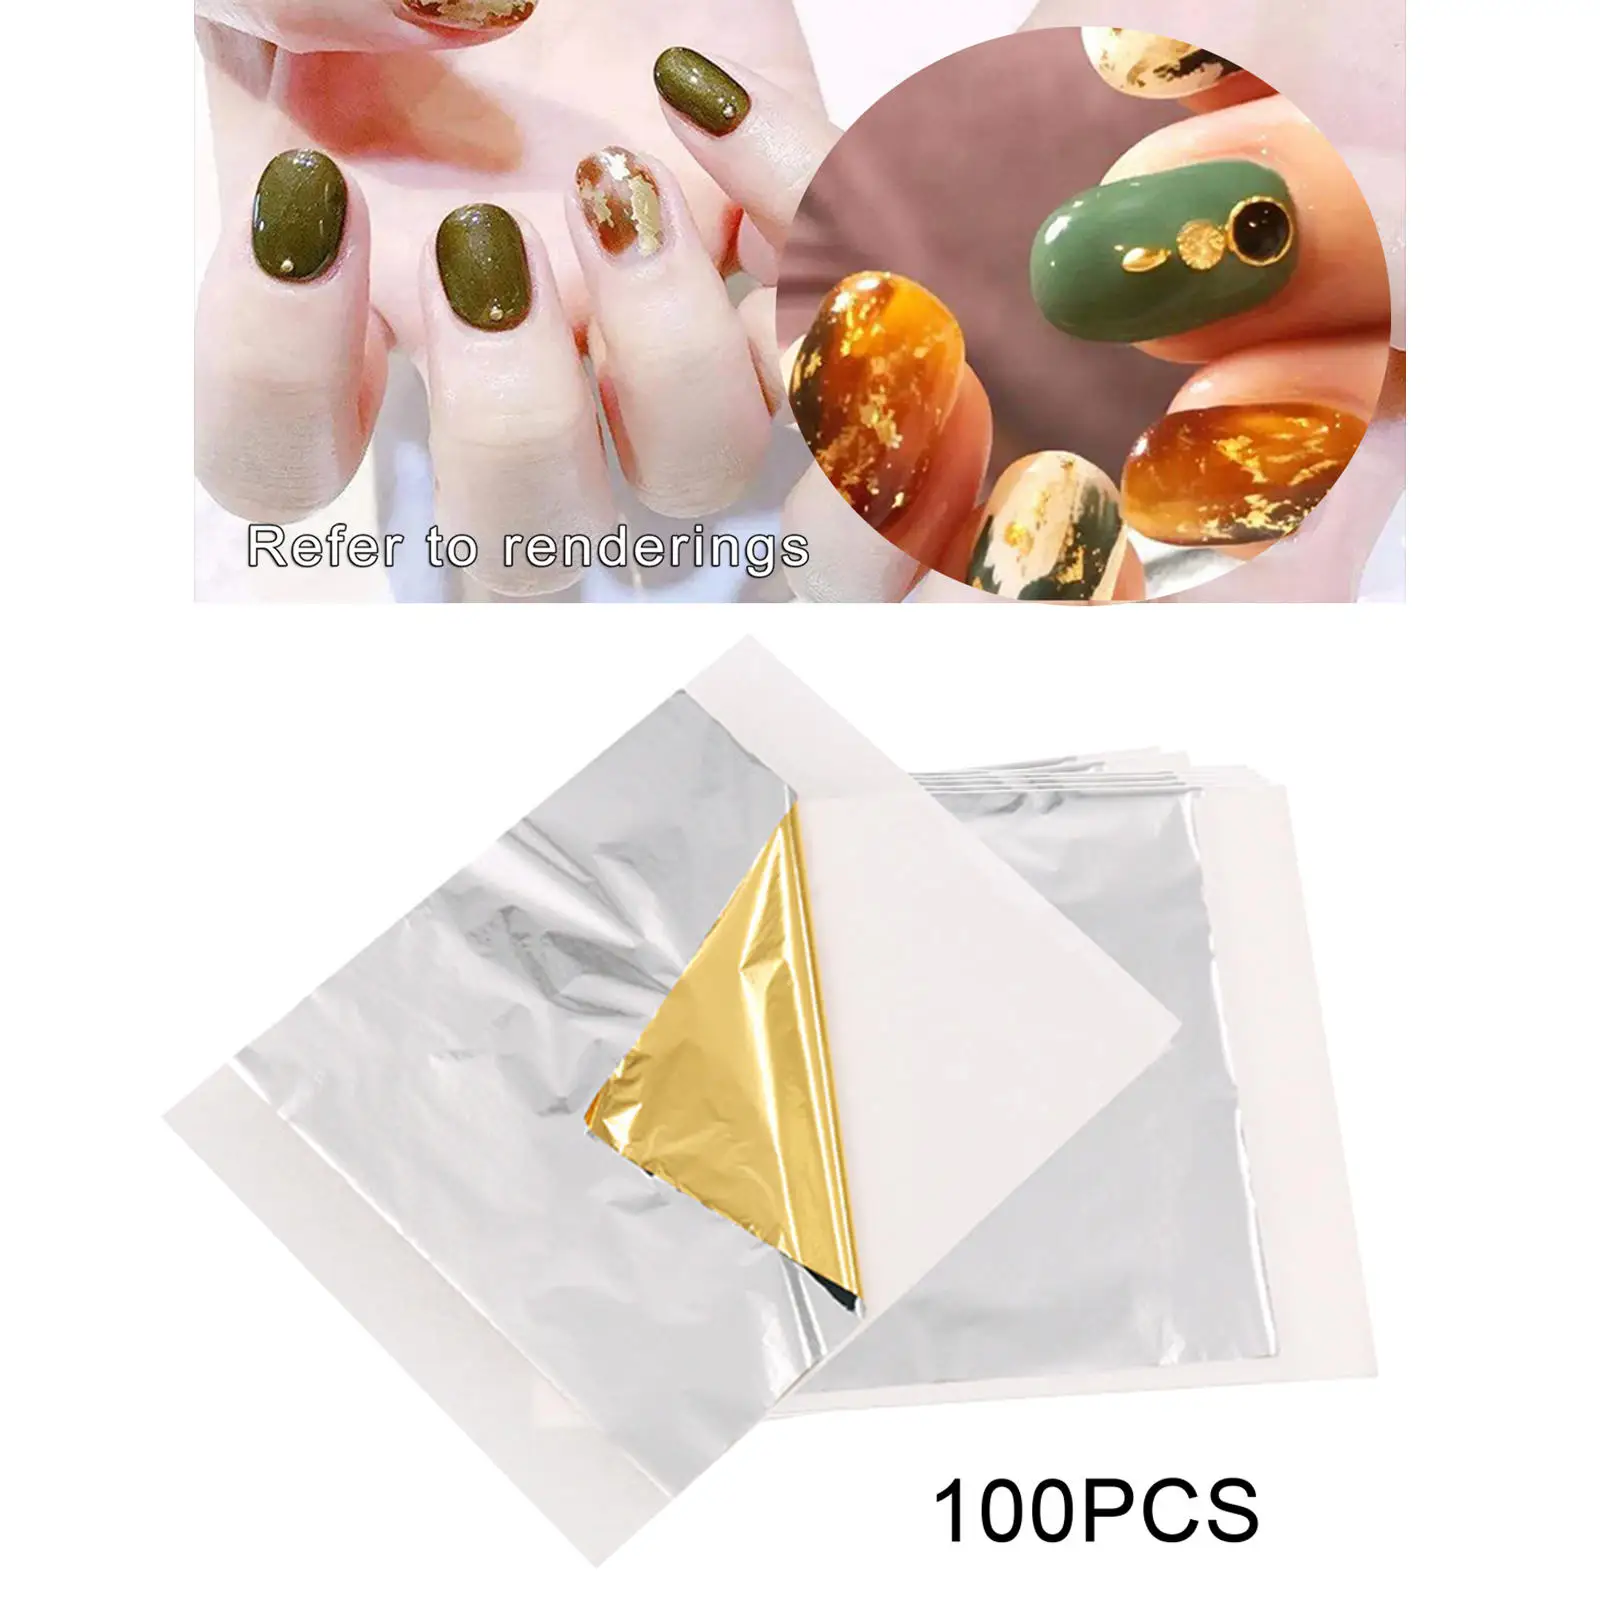 100 Sheets Gold Foil Leaf Nail Art Paper for Holiday Decoration Nail Manicure Gilding Crafting Nail Painting Home Craft